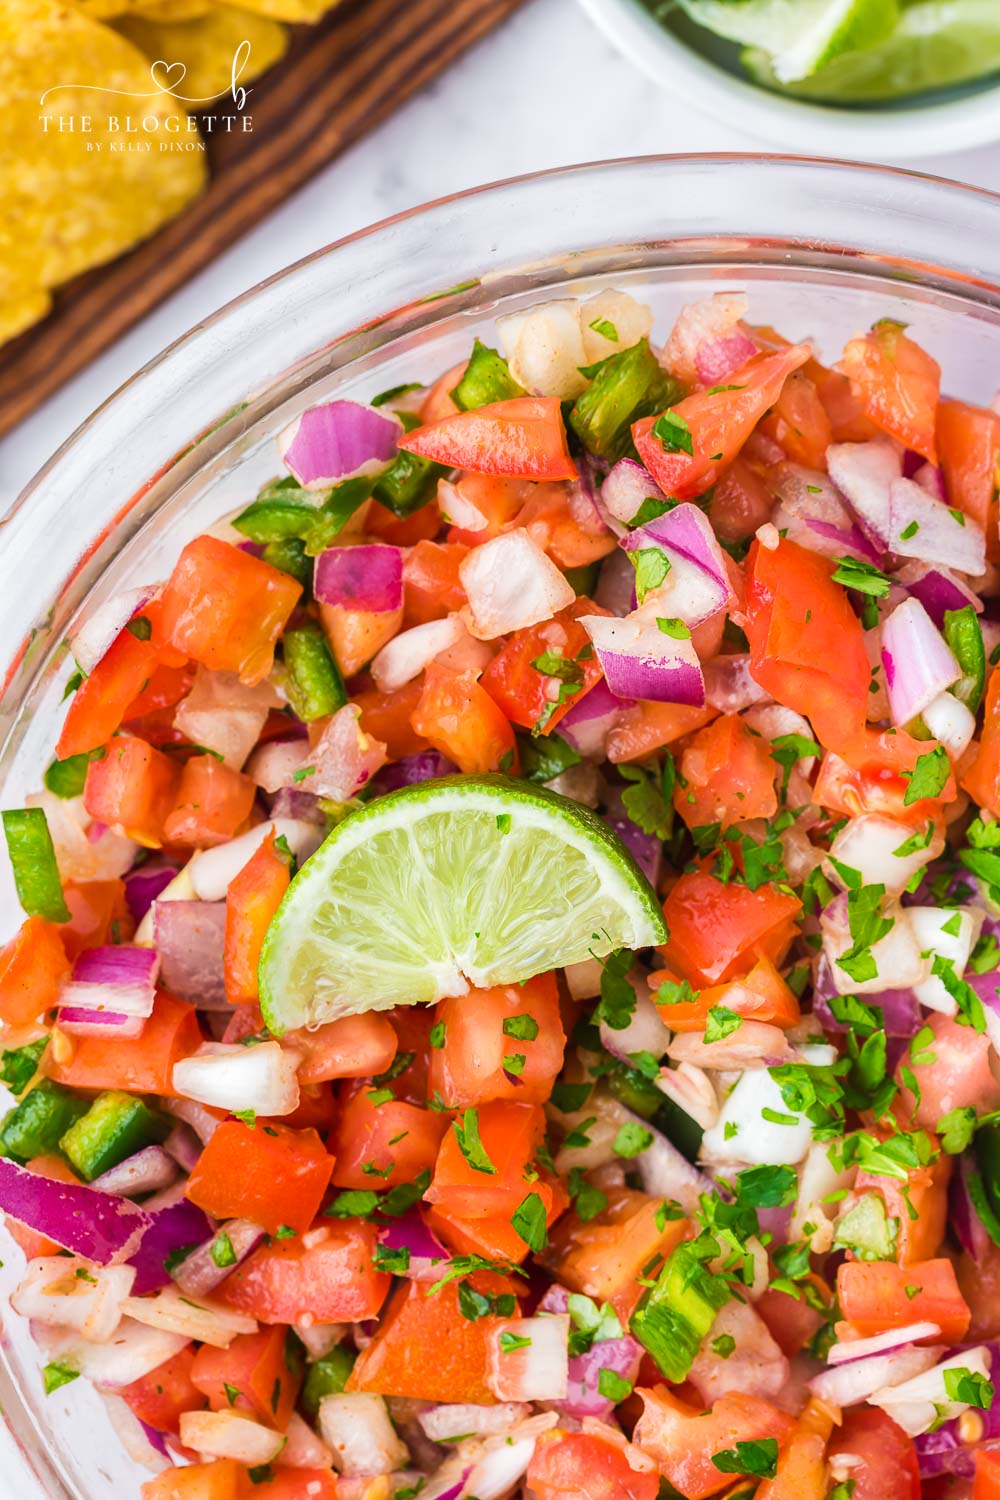 Homemade Pico de Gallo is so fresh and easy to make! Featuring fresh tomatoes, jalapeños, onions, cilantro, and more.